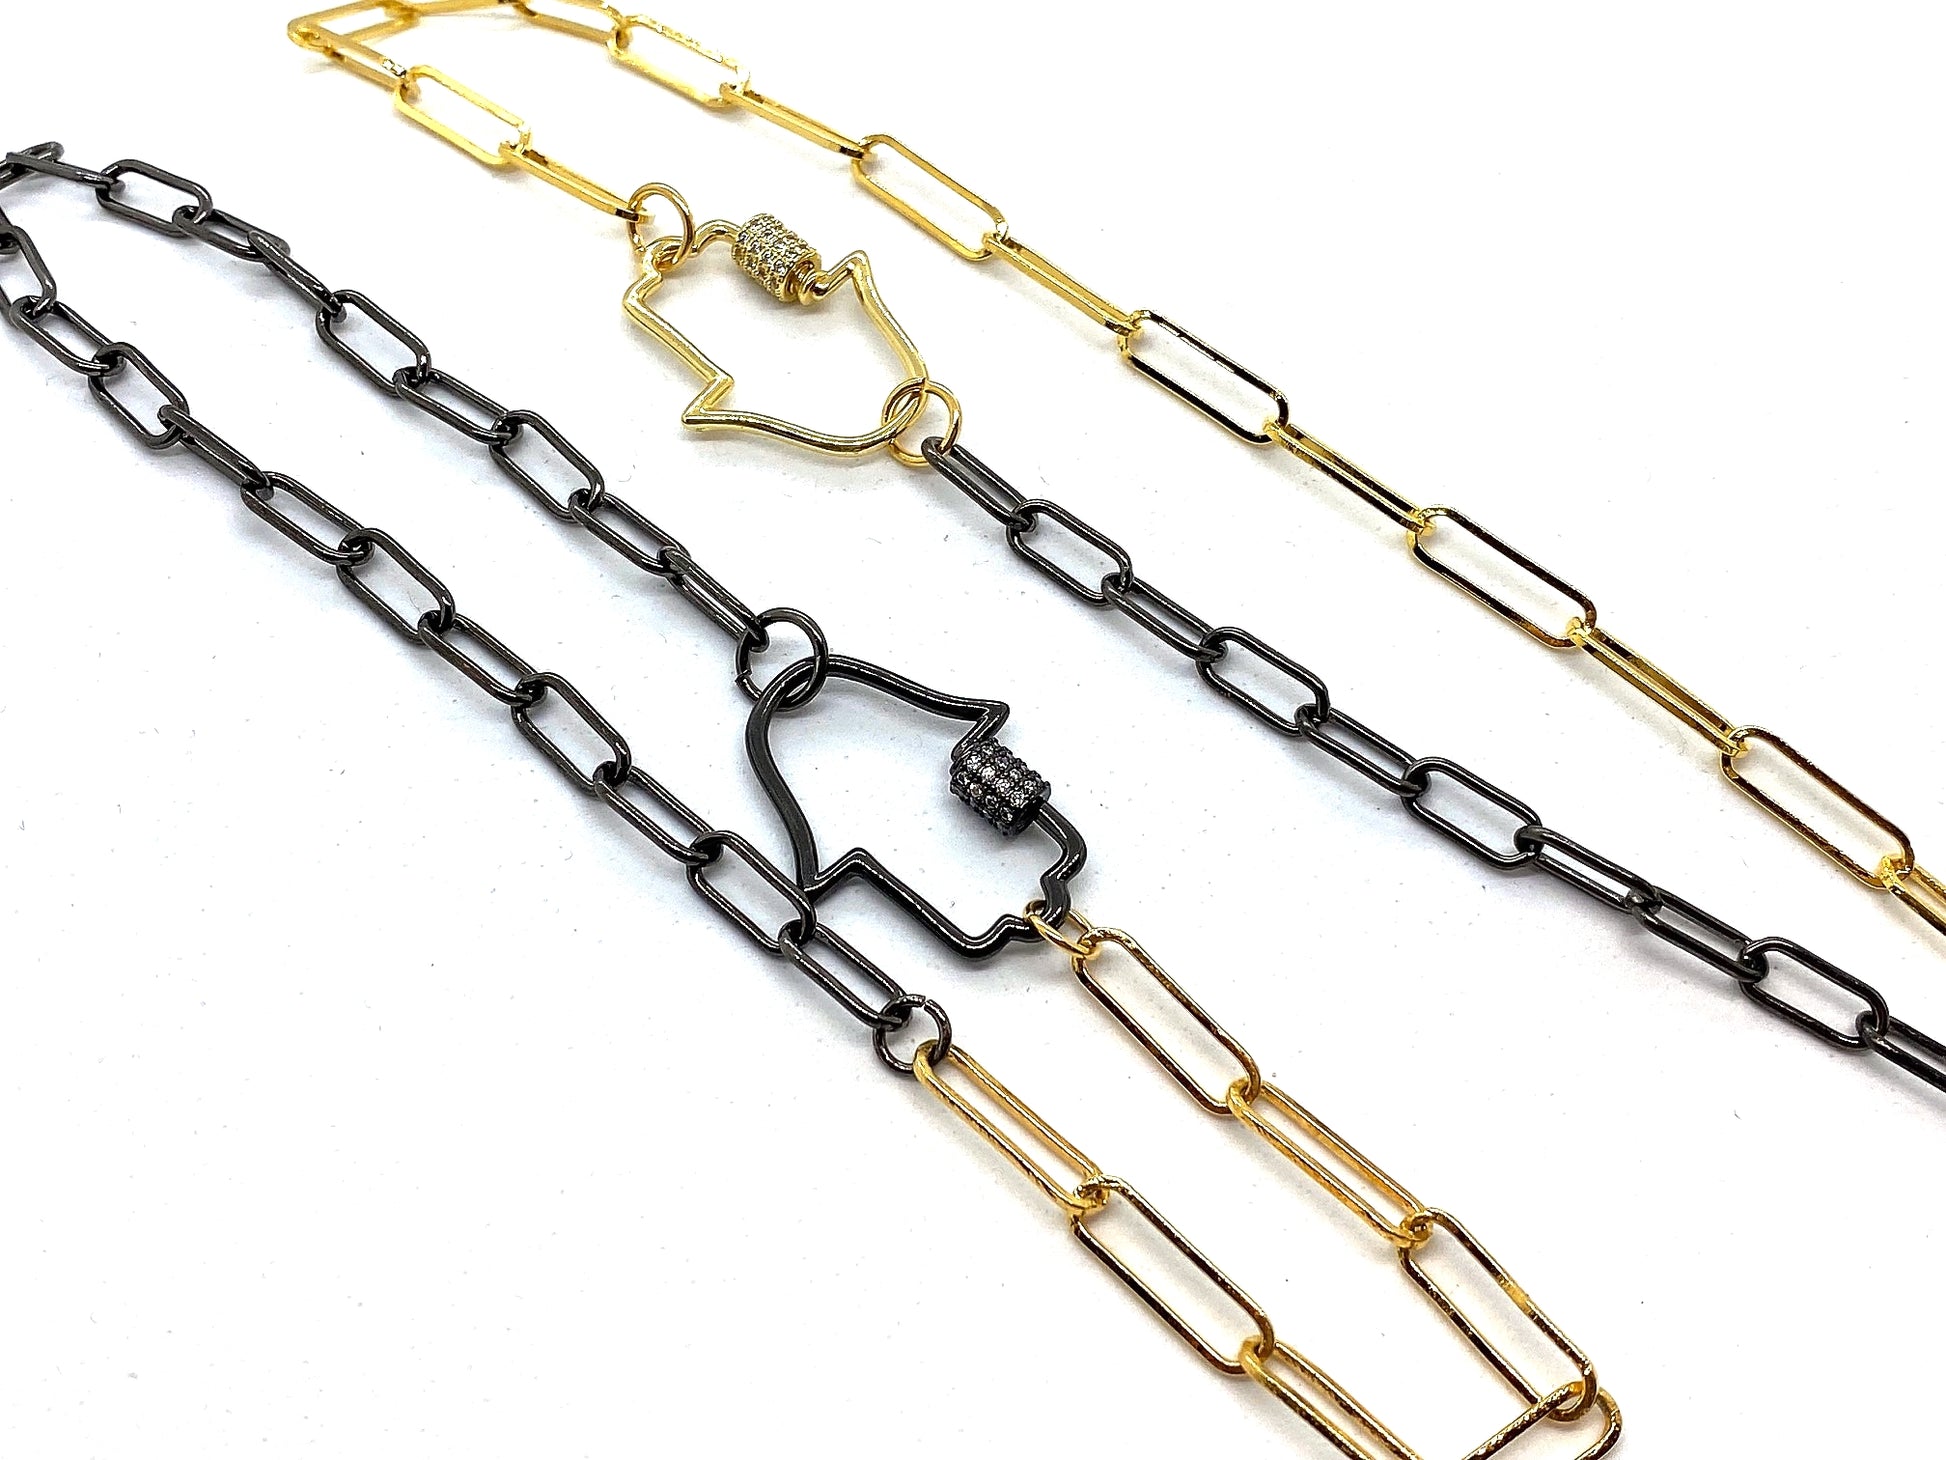 Two tone paperclip necklace with a screw locking hamsa clasp - Emmis Jewelry, Necklaces, [product_color]